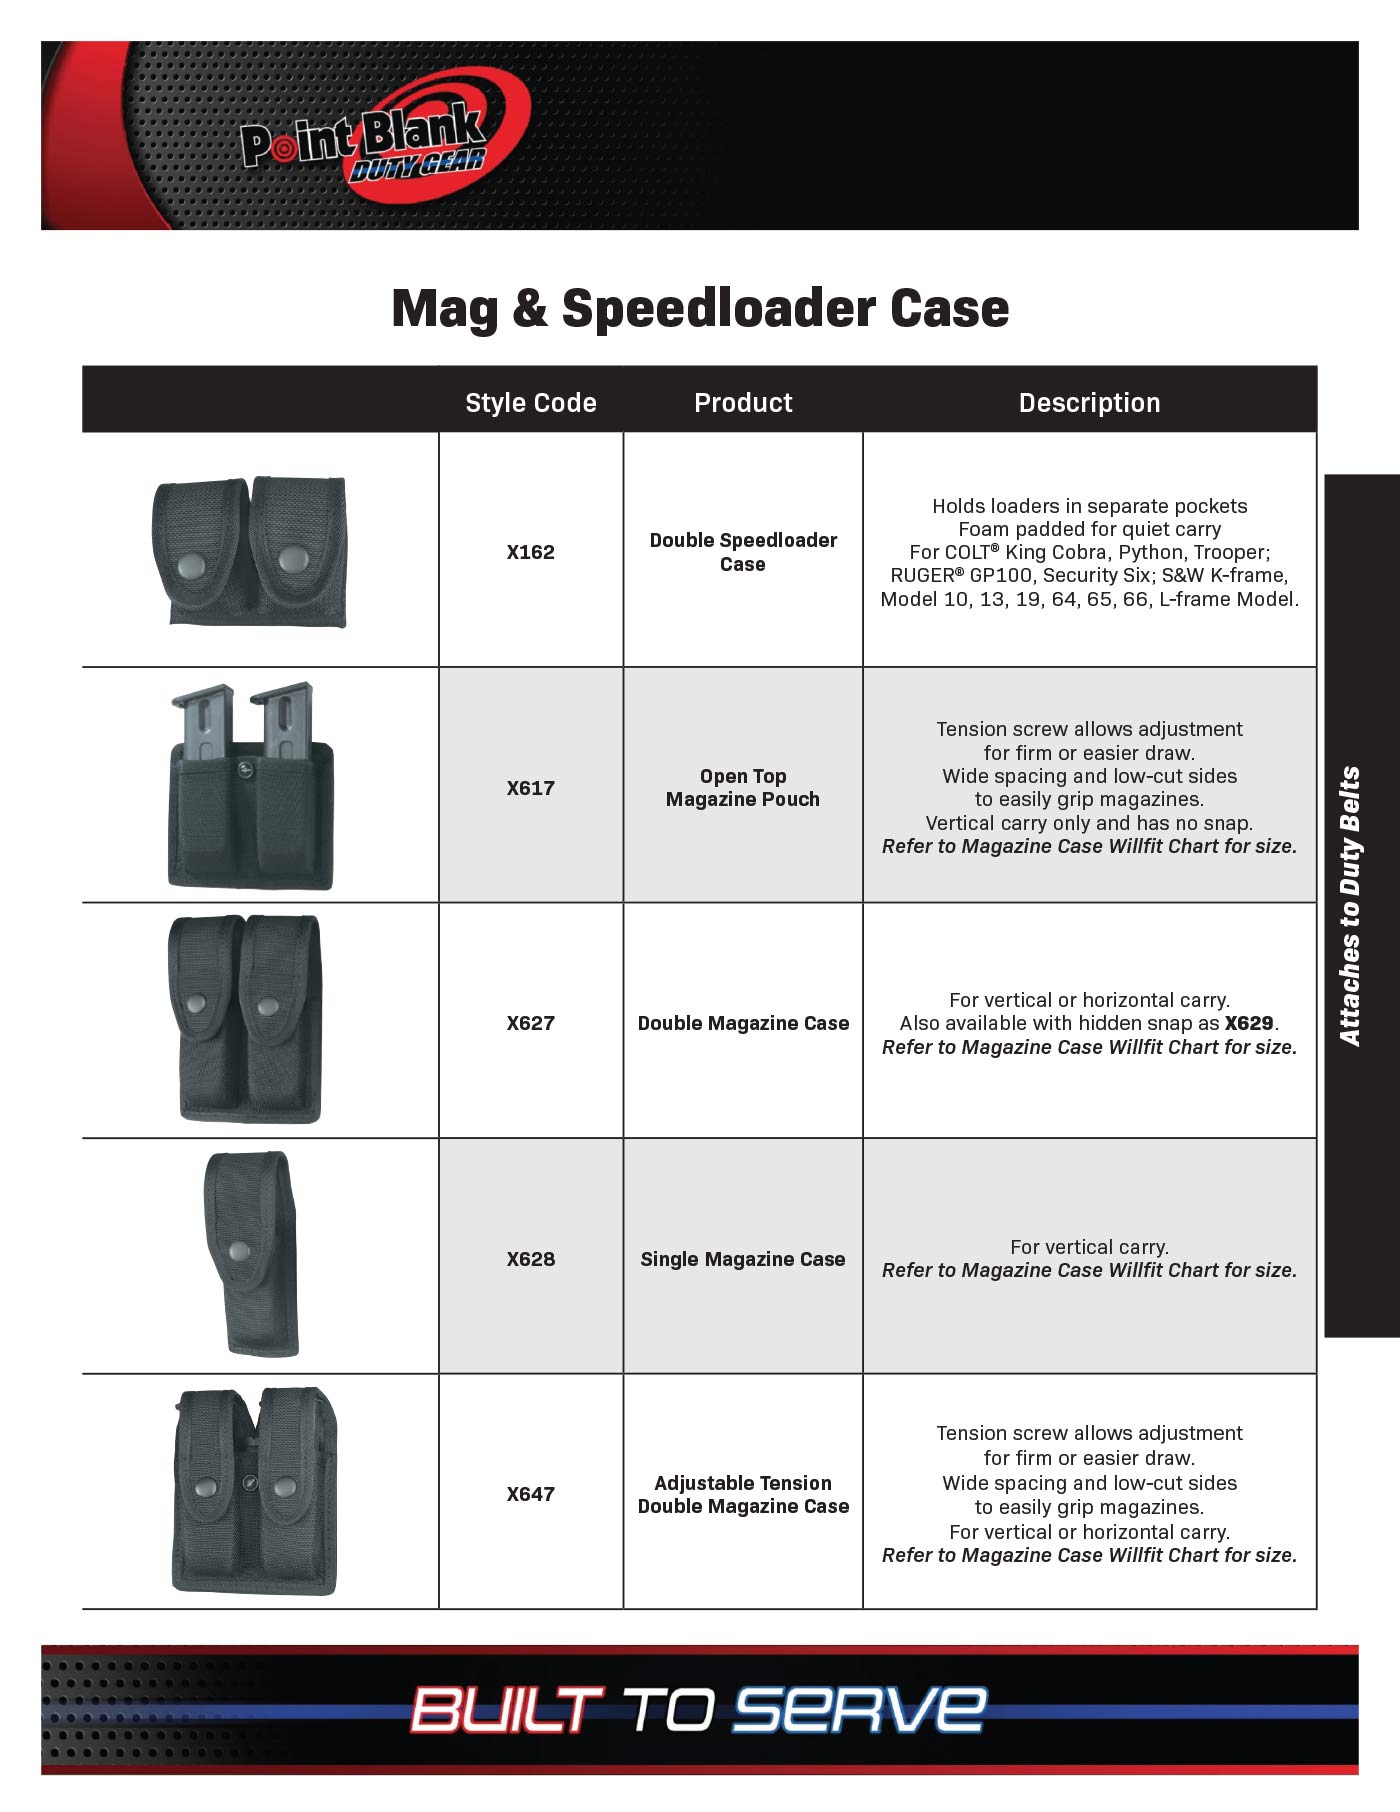 speedloader and mag cases